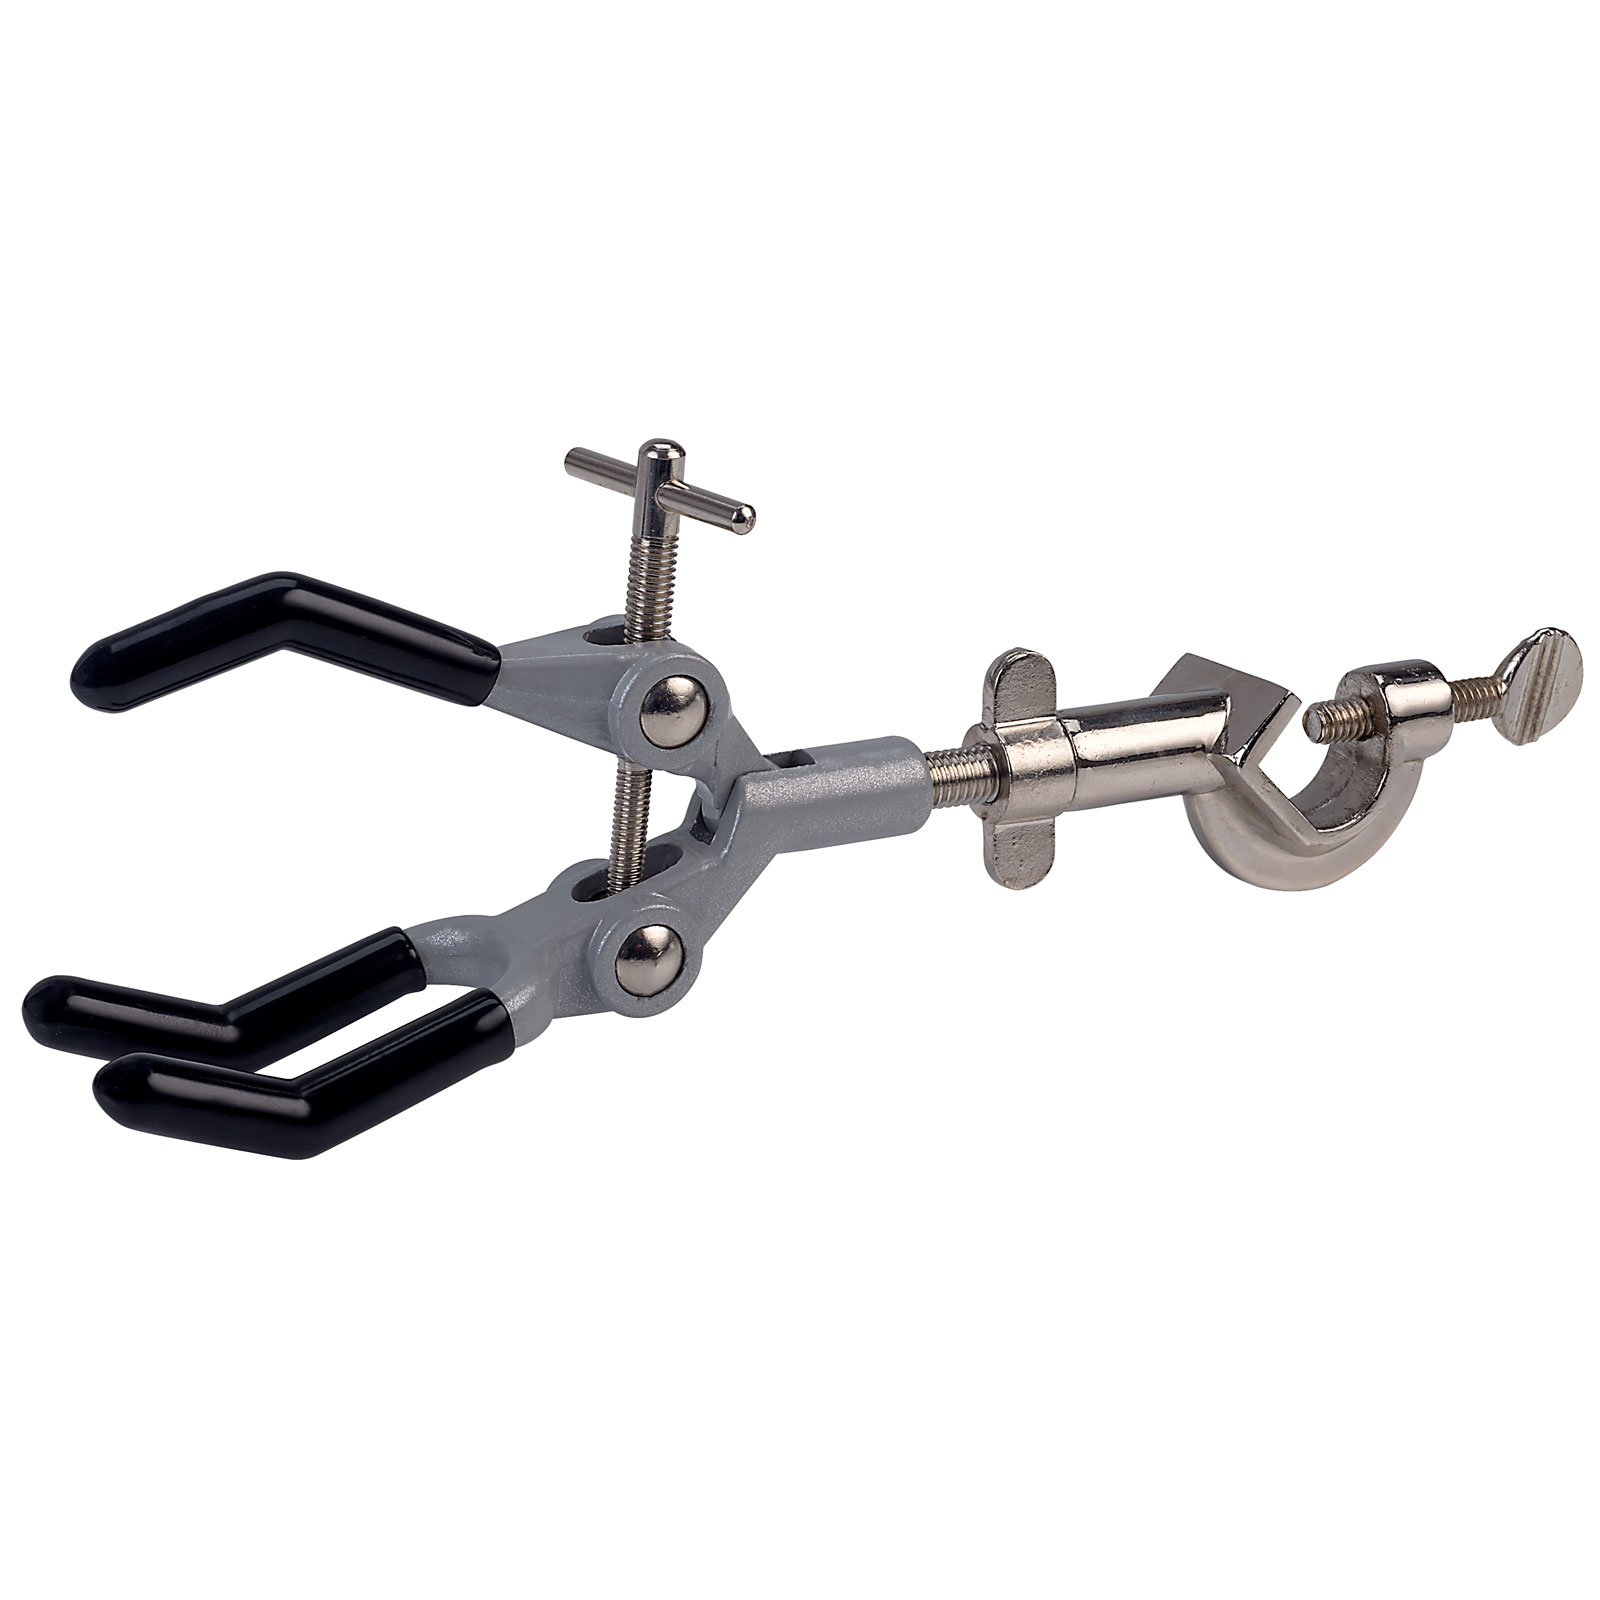 3 Prong Swivel Clamp and Bosshead Clamp Holder Set